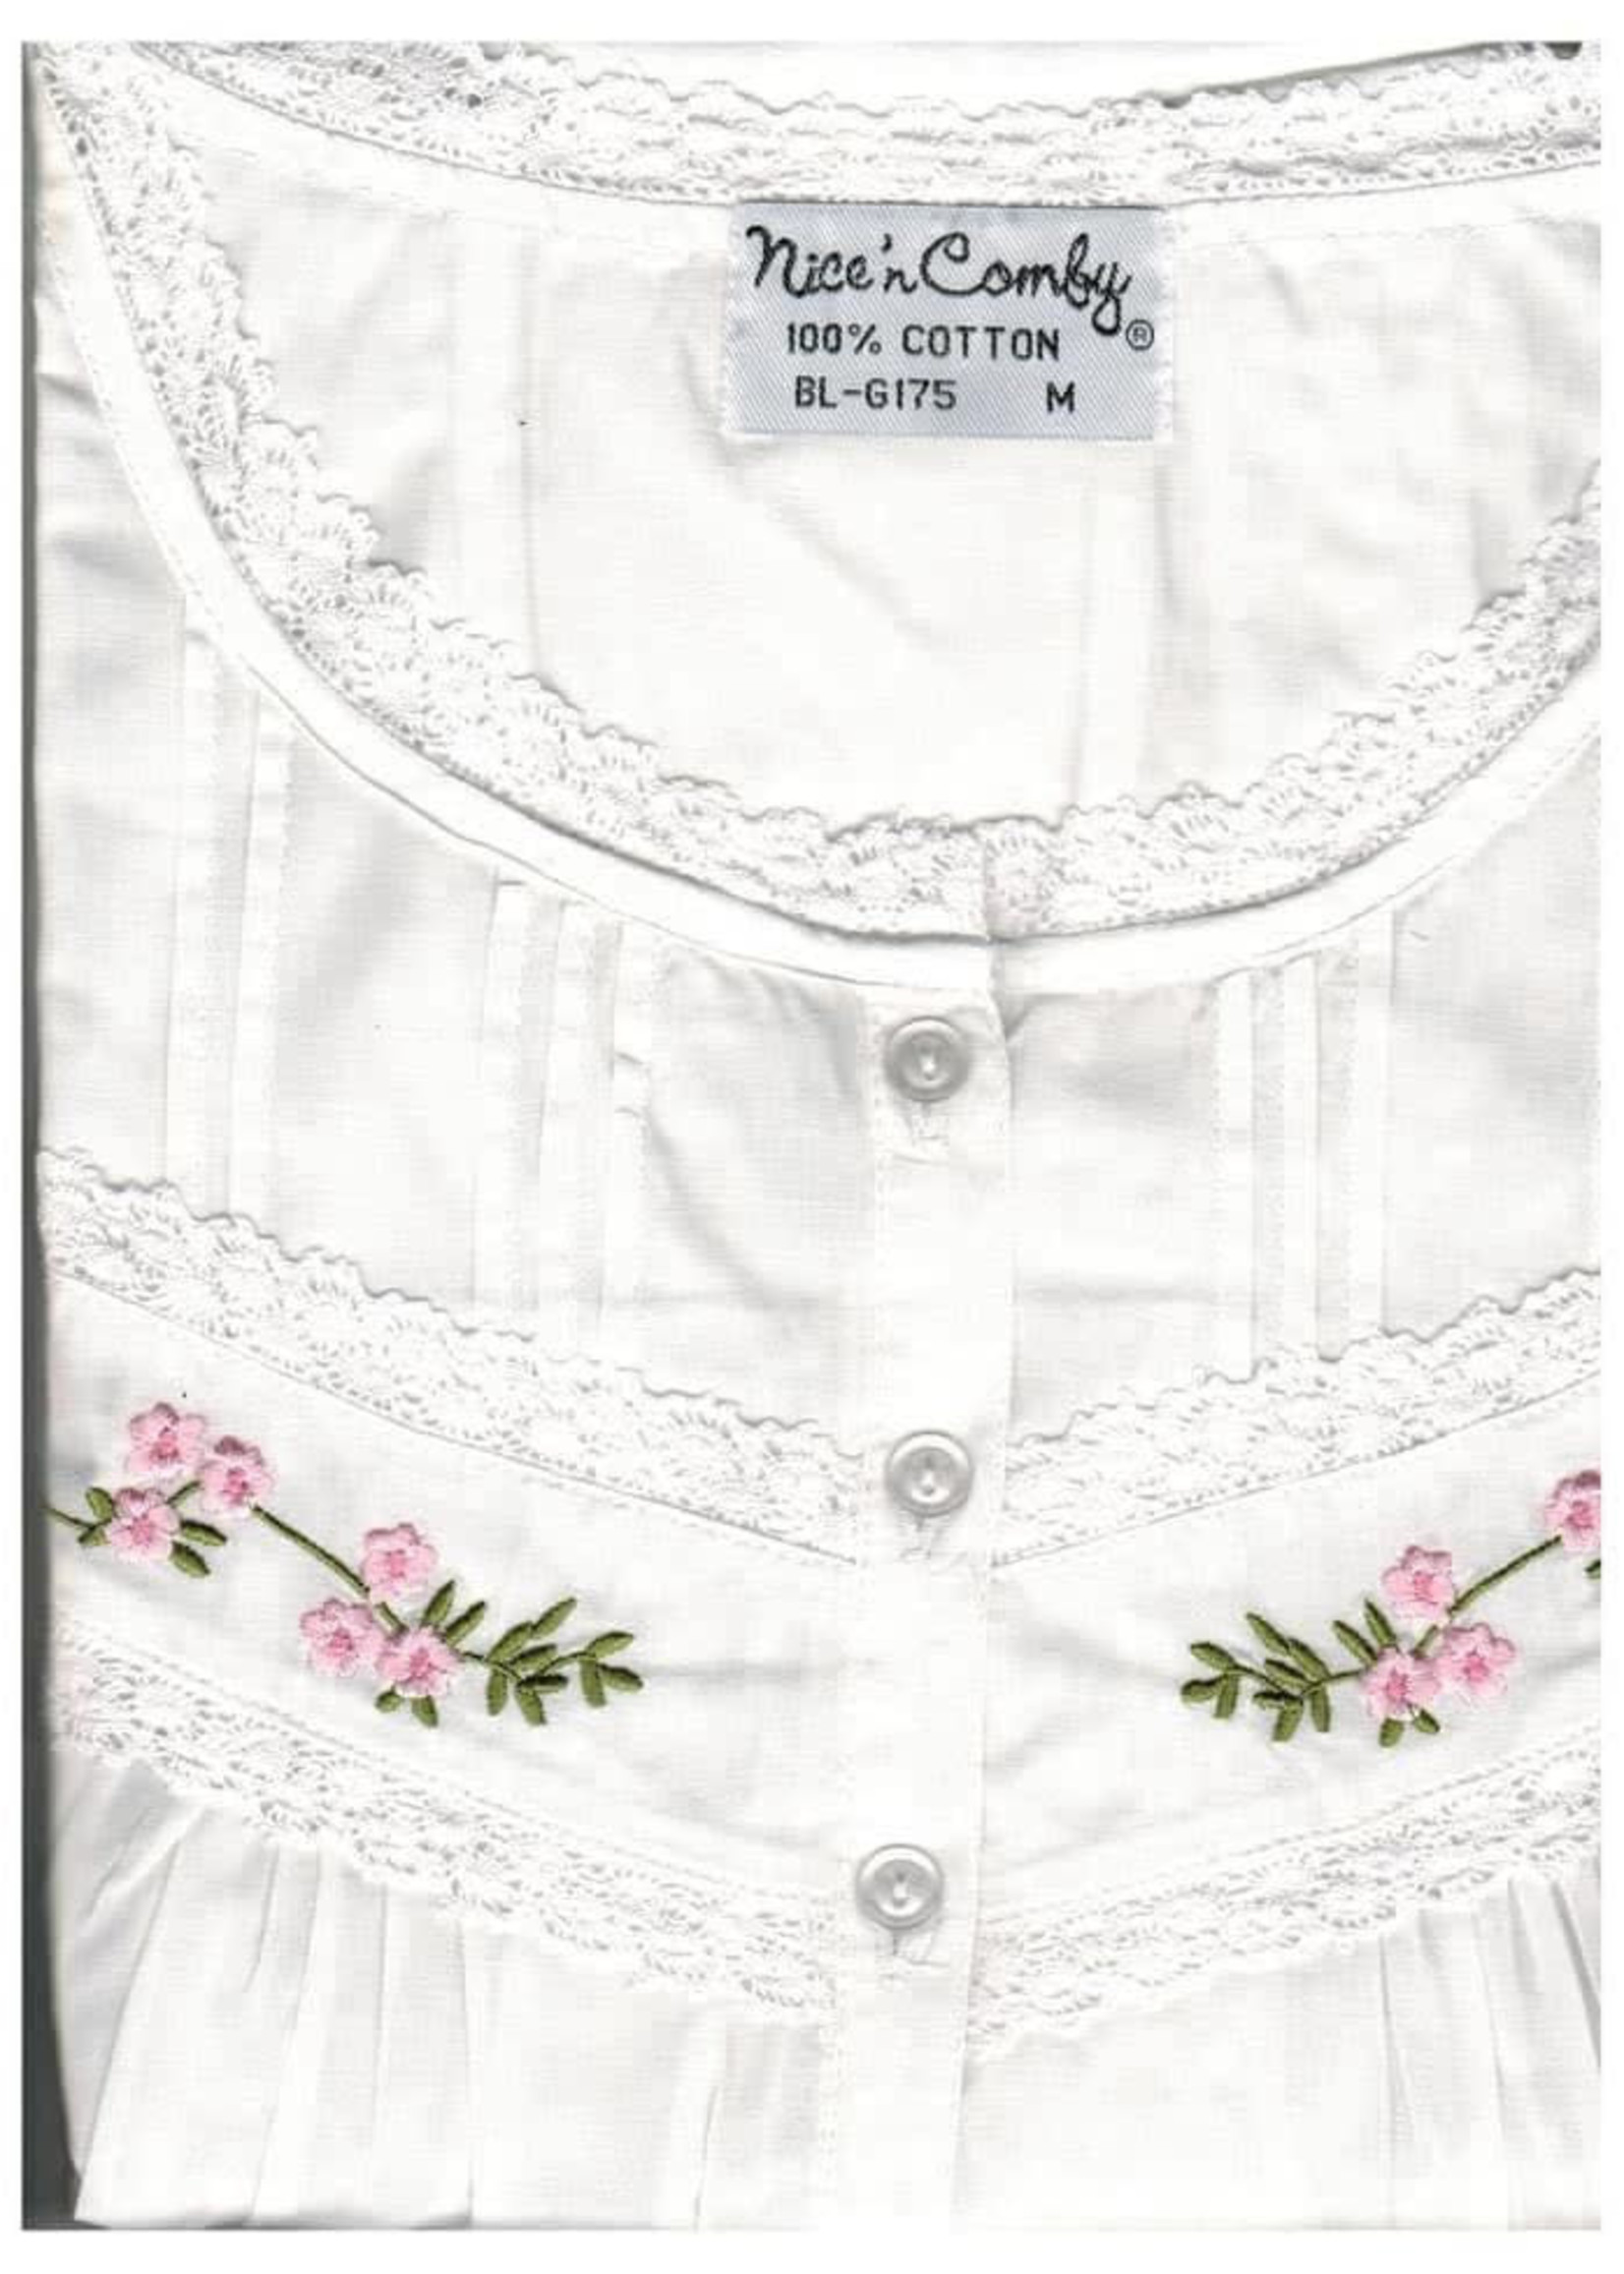 Nice n' Comfy Embroidered Nightgown with Pink Flowers